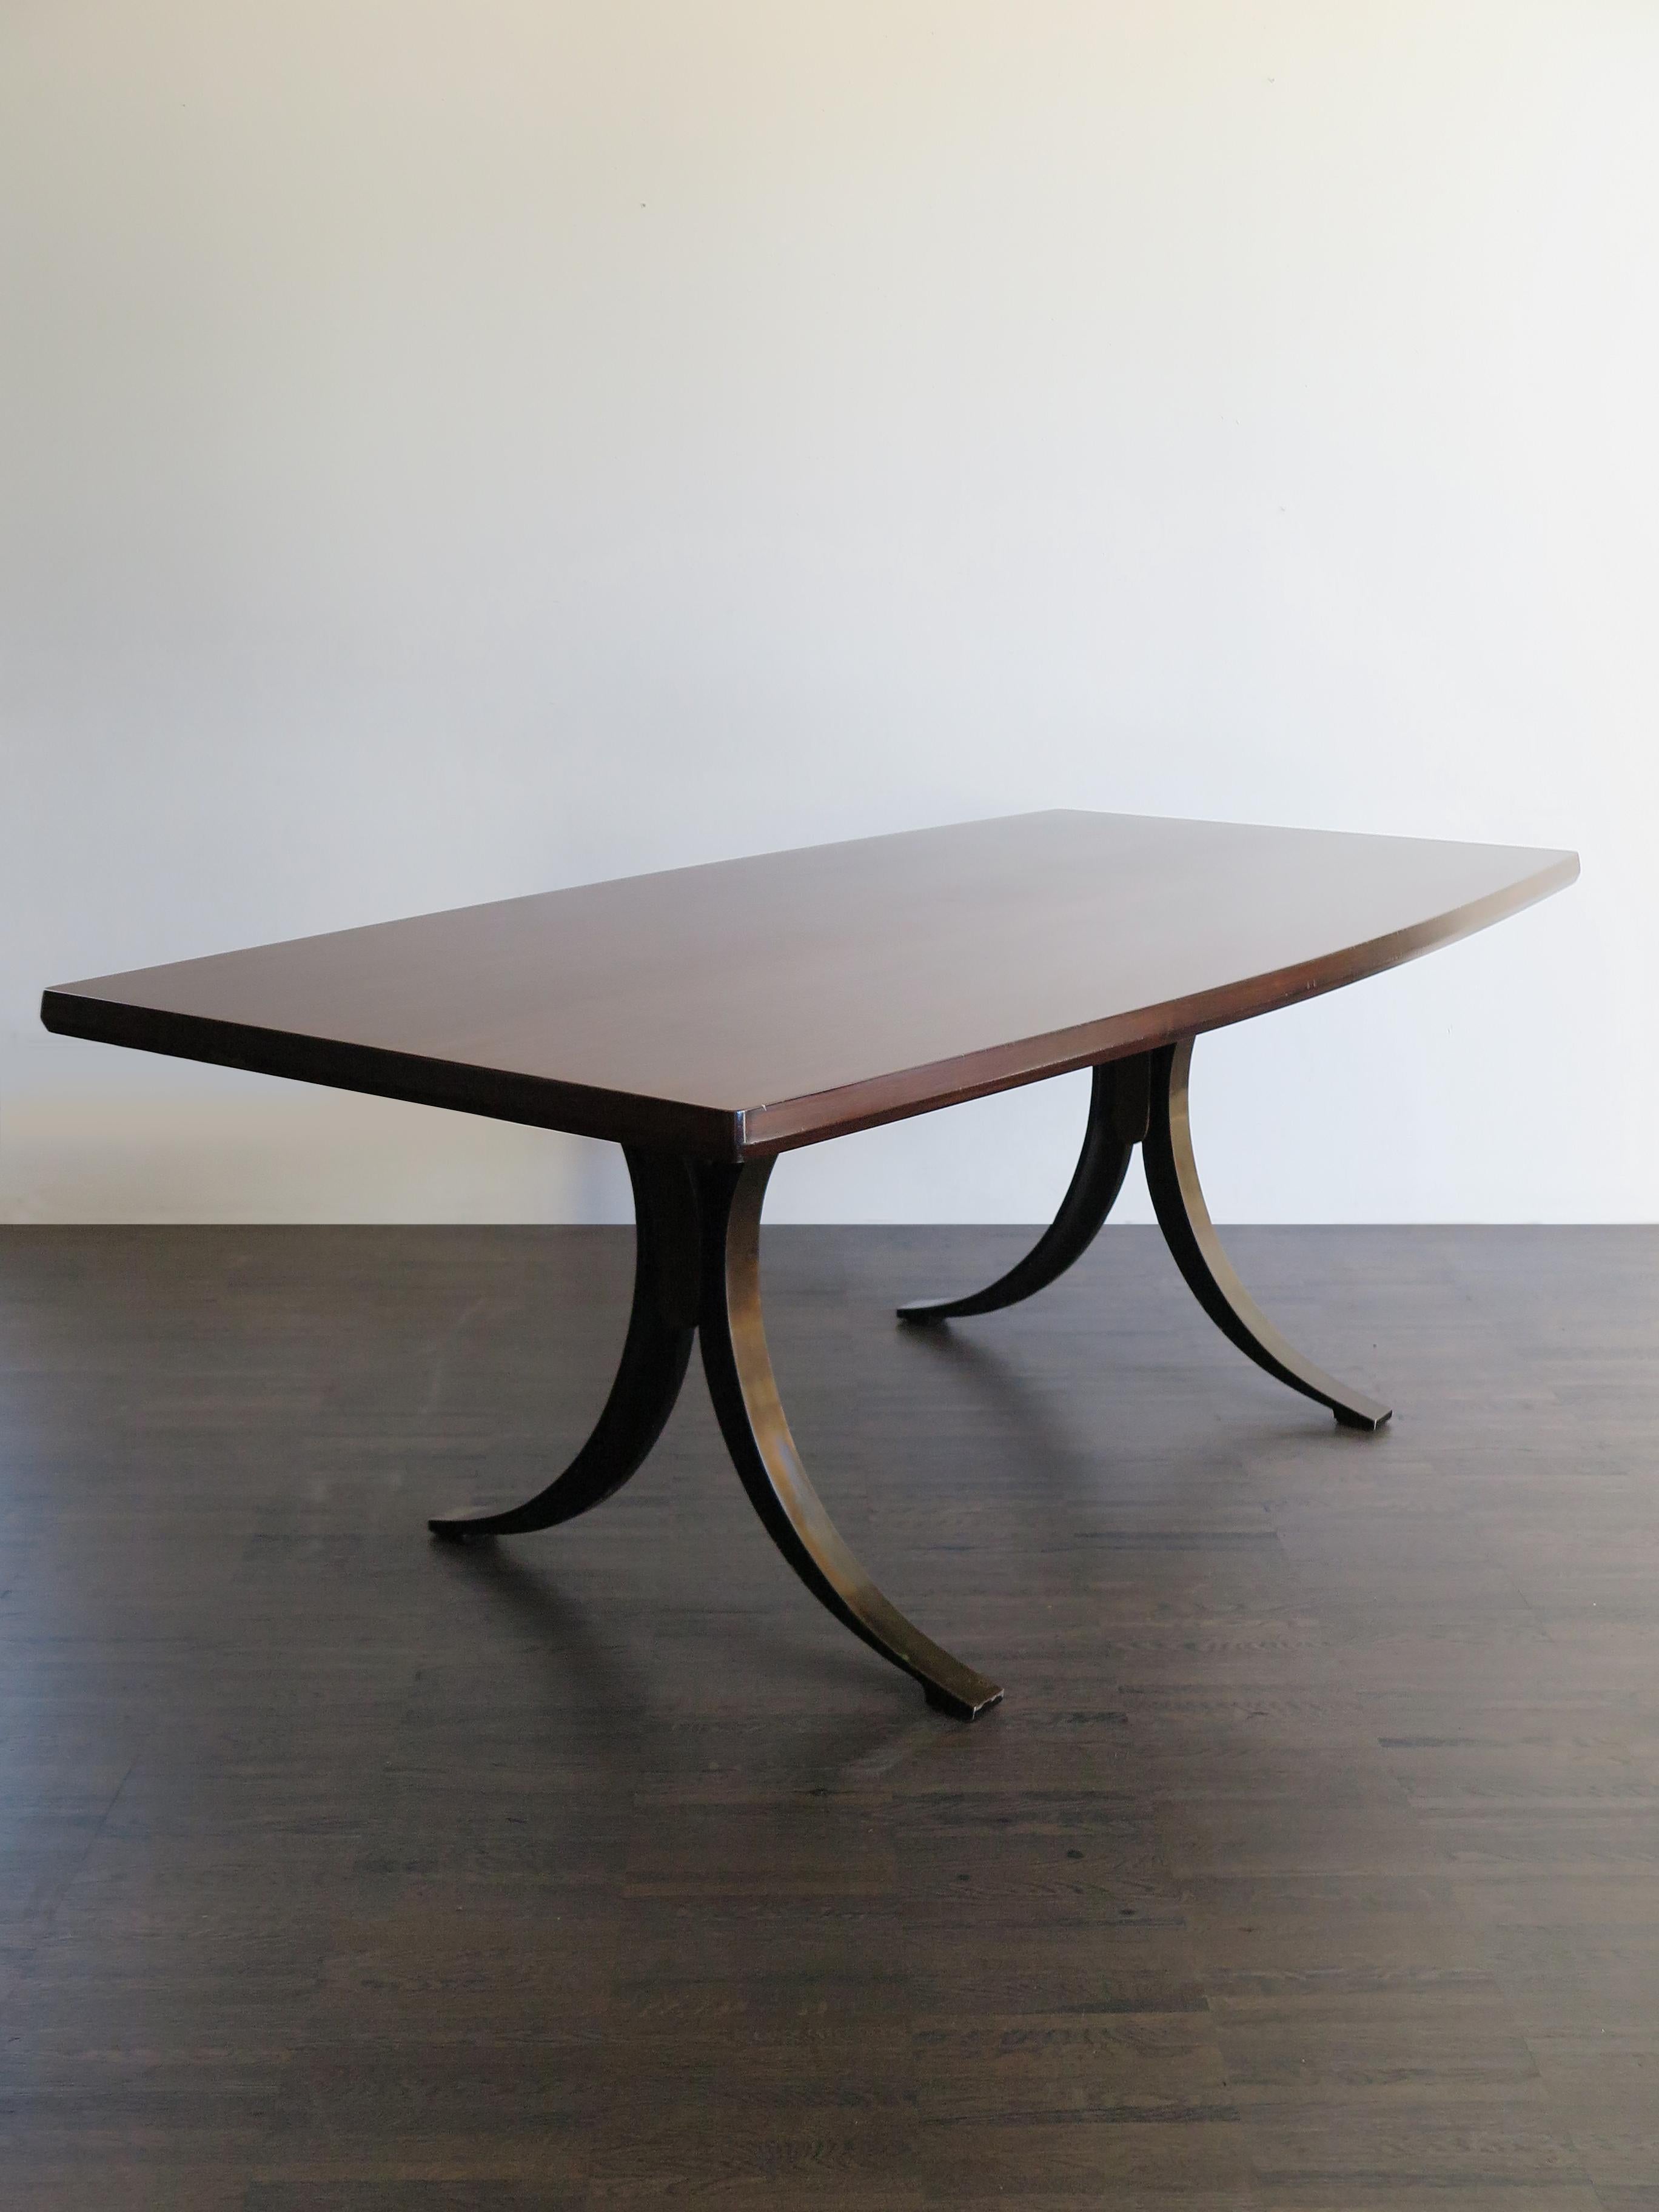 Italian Mid-Century Modern design dining table model T102 designed by Italian designers Eugenio Gerli and Osvaldo Borsani for Tecno with structure in nickel-plated steel bands and wooden top with long rounded sides, circa 1960.

Please note that